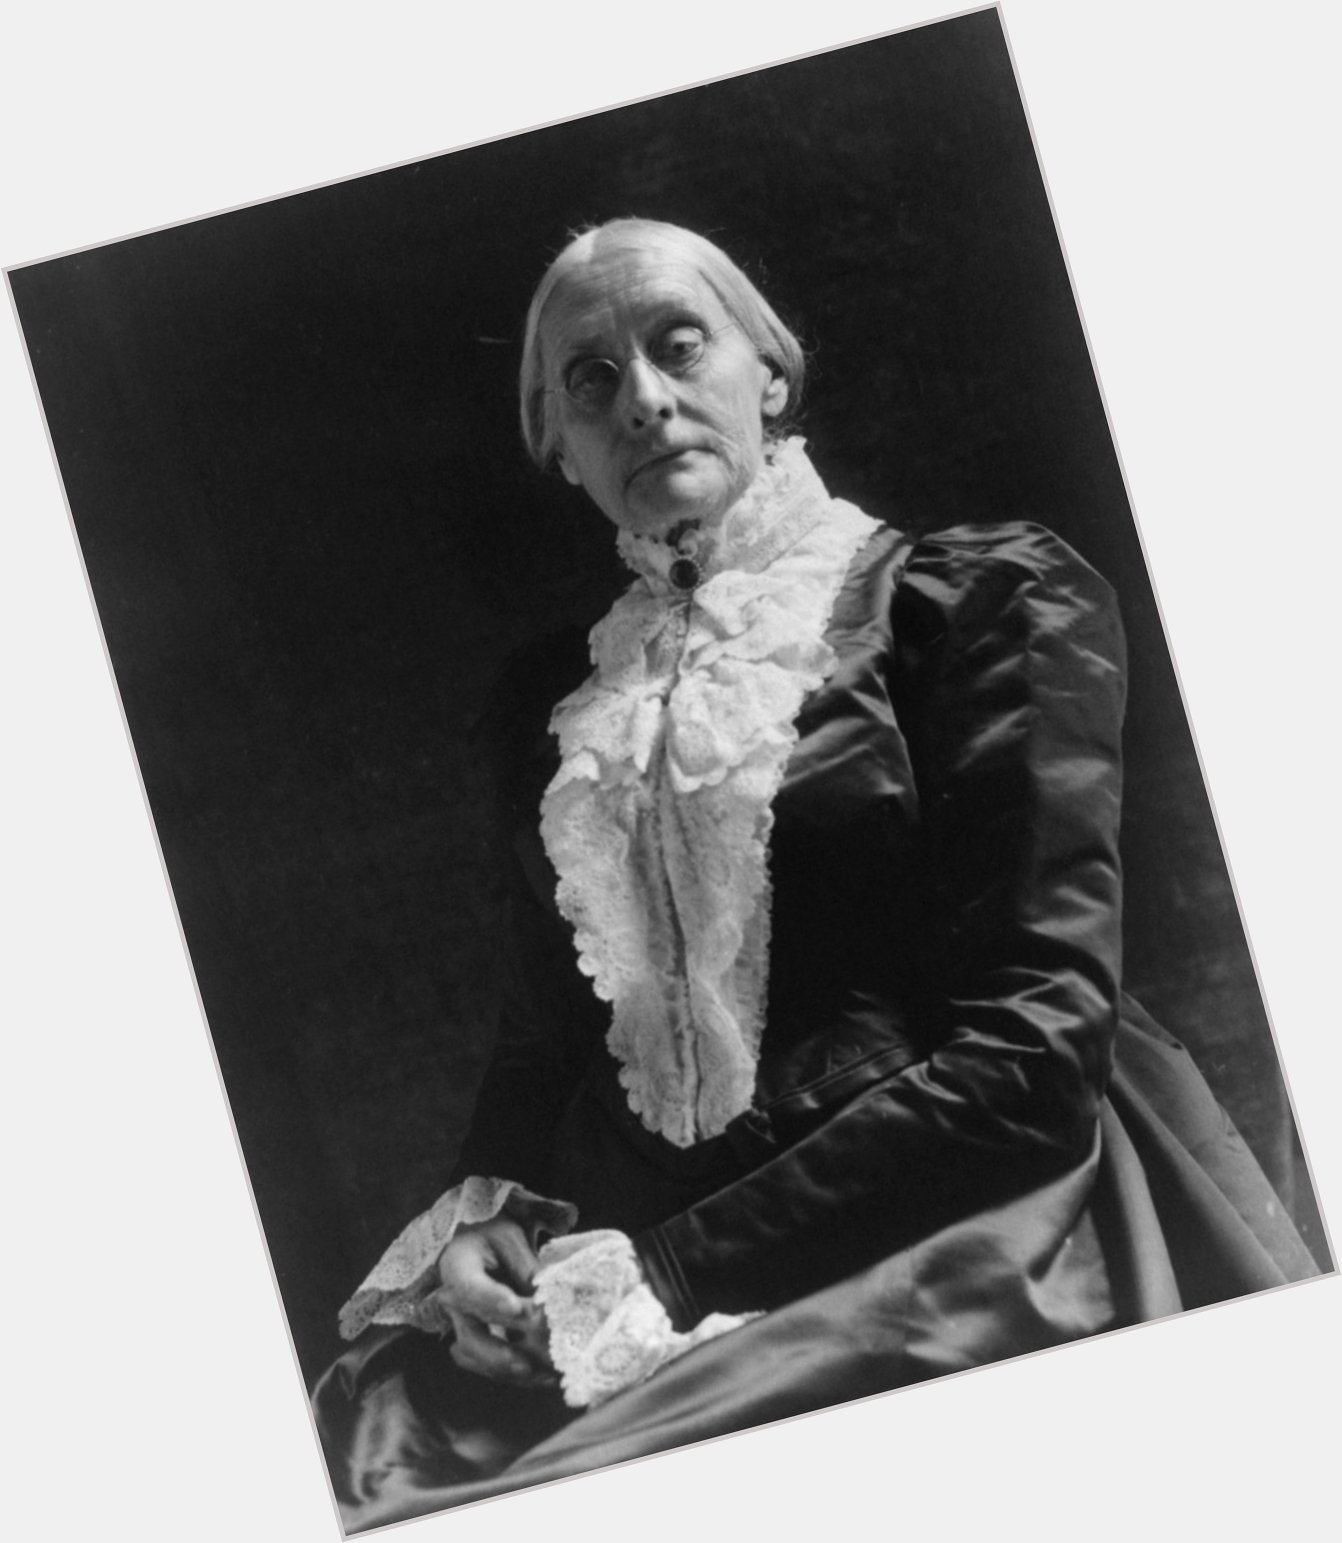 Susan B Anthony exclusive hot pic 3.jpg